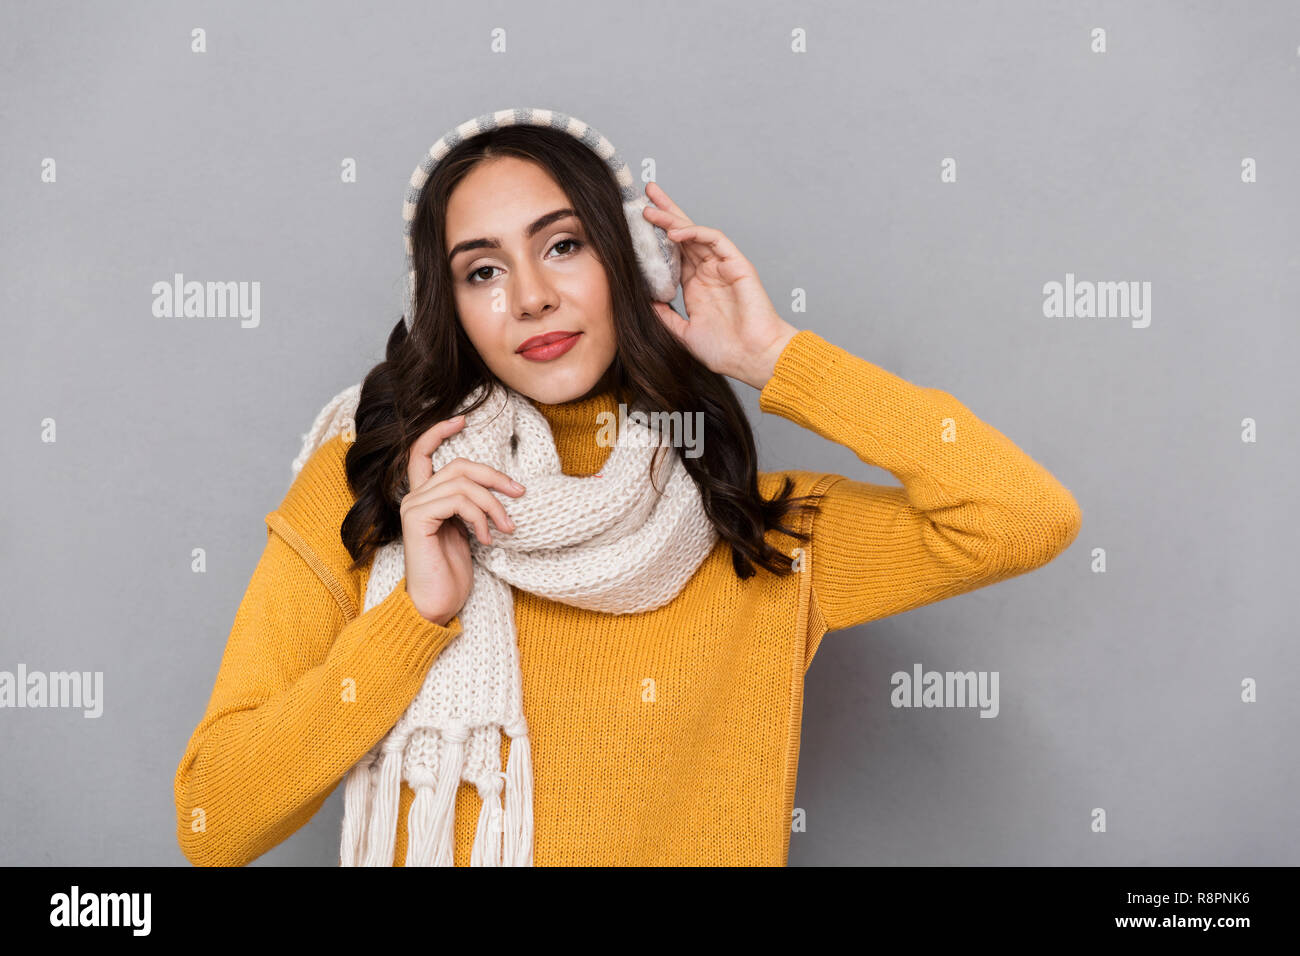 Portrait of adorable woman wearing ear muffs and scarf looking at camera isolated over gray background Stock Photo